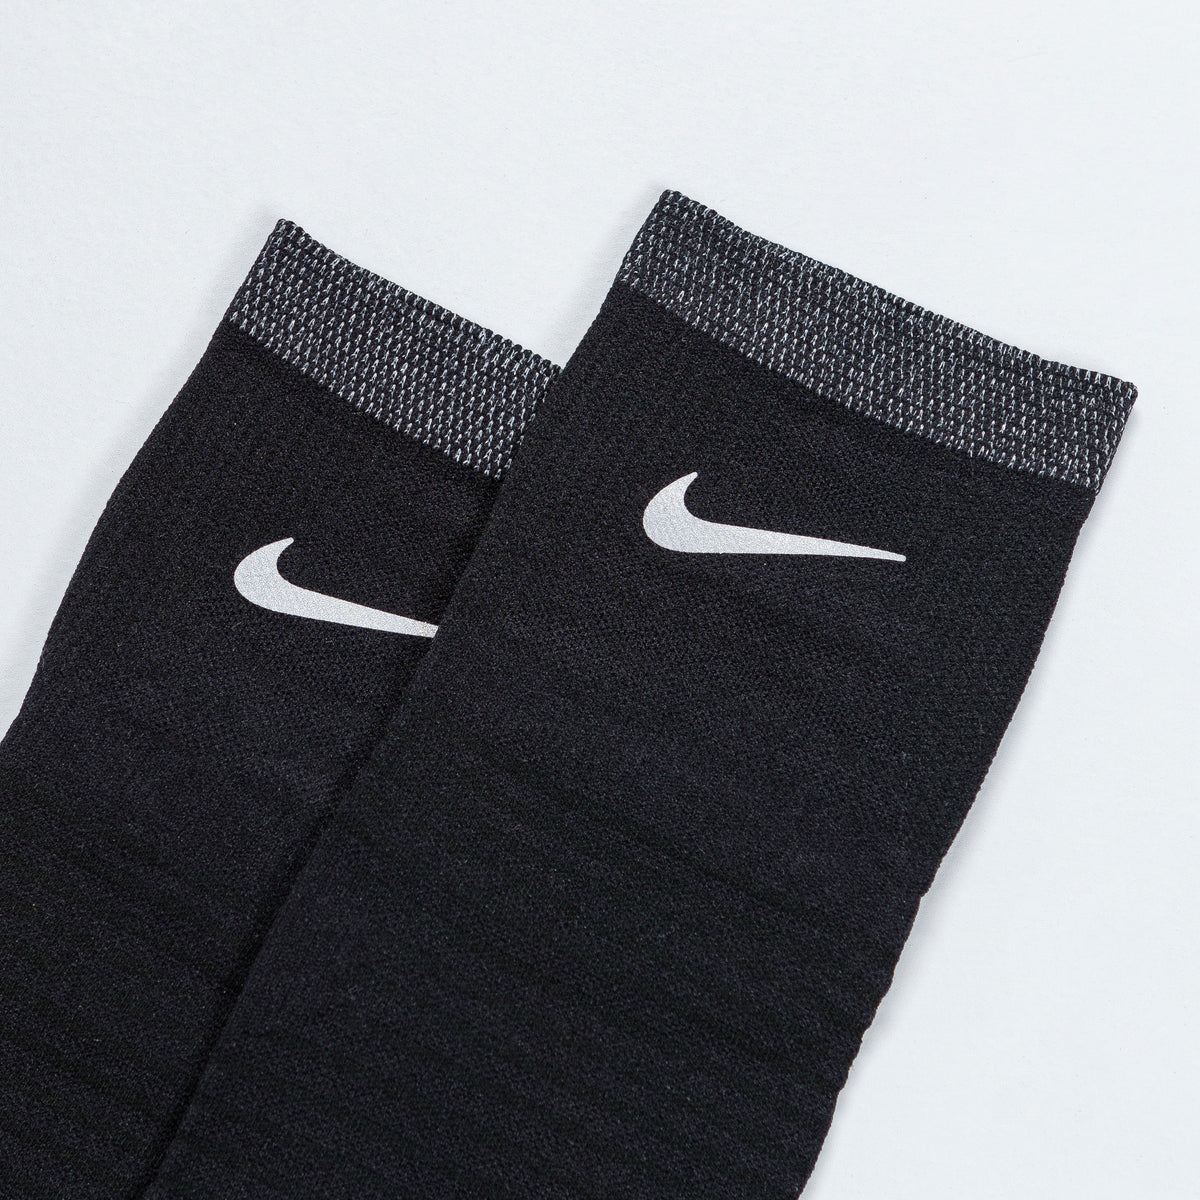 Nike - Spark Lightweight Ankle - Black/Reflective Silver | Up There ...